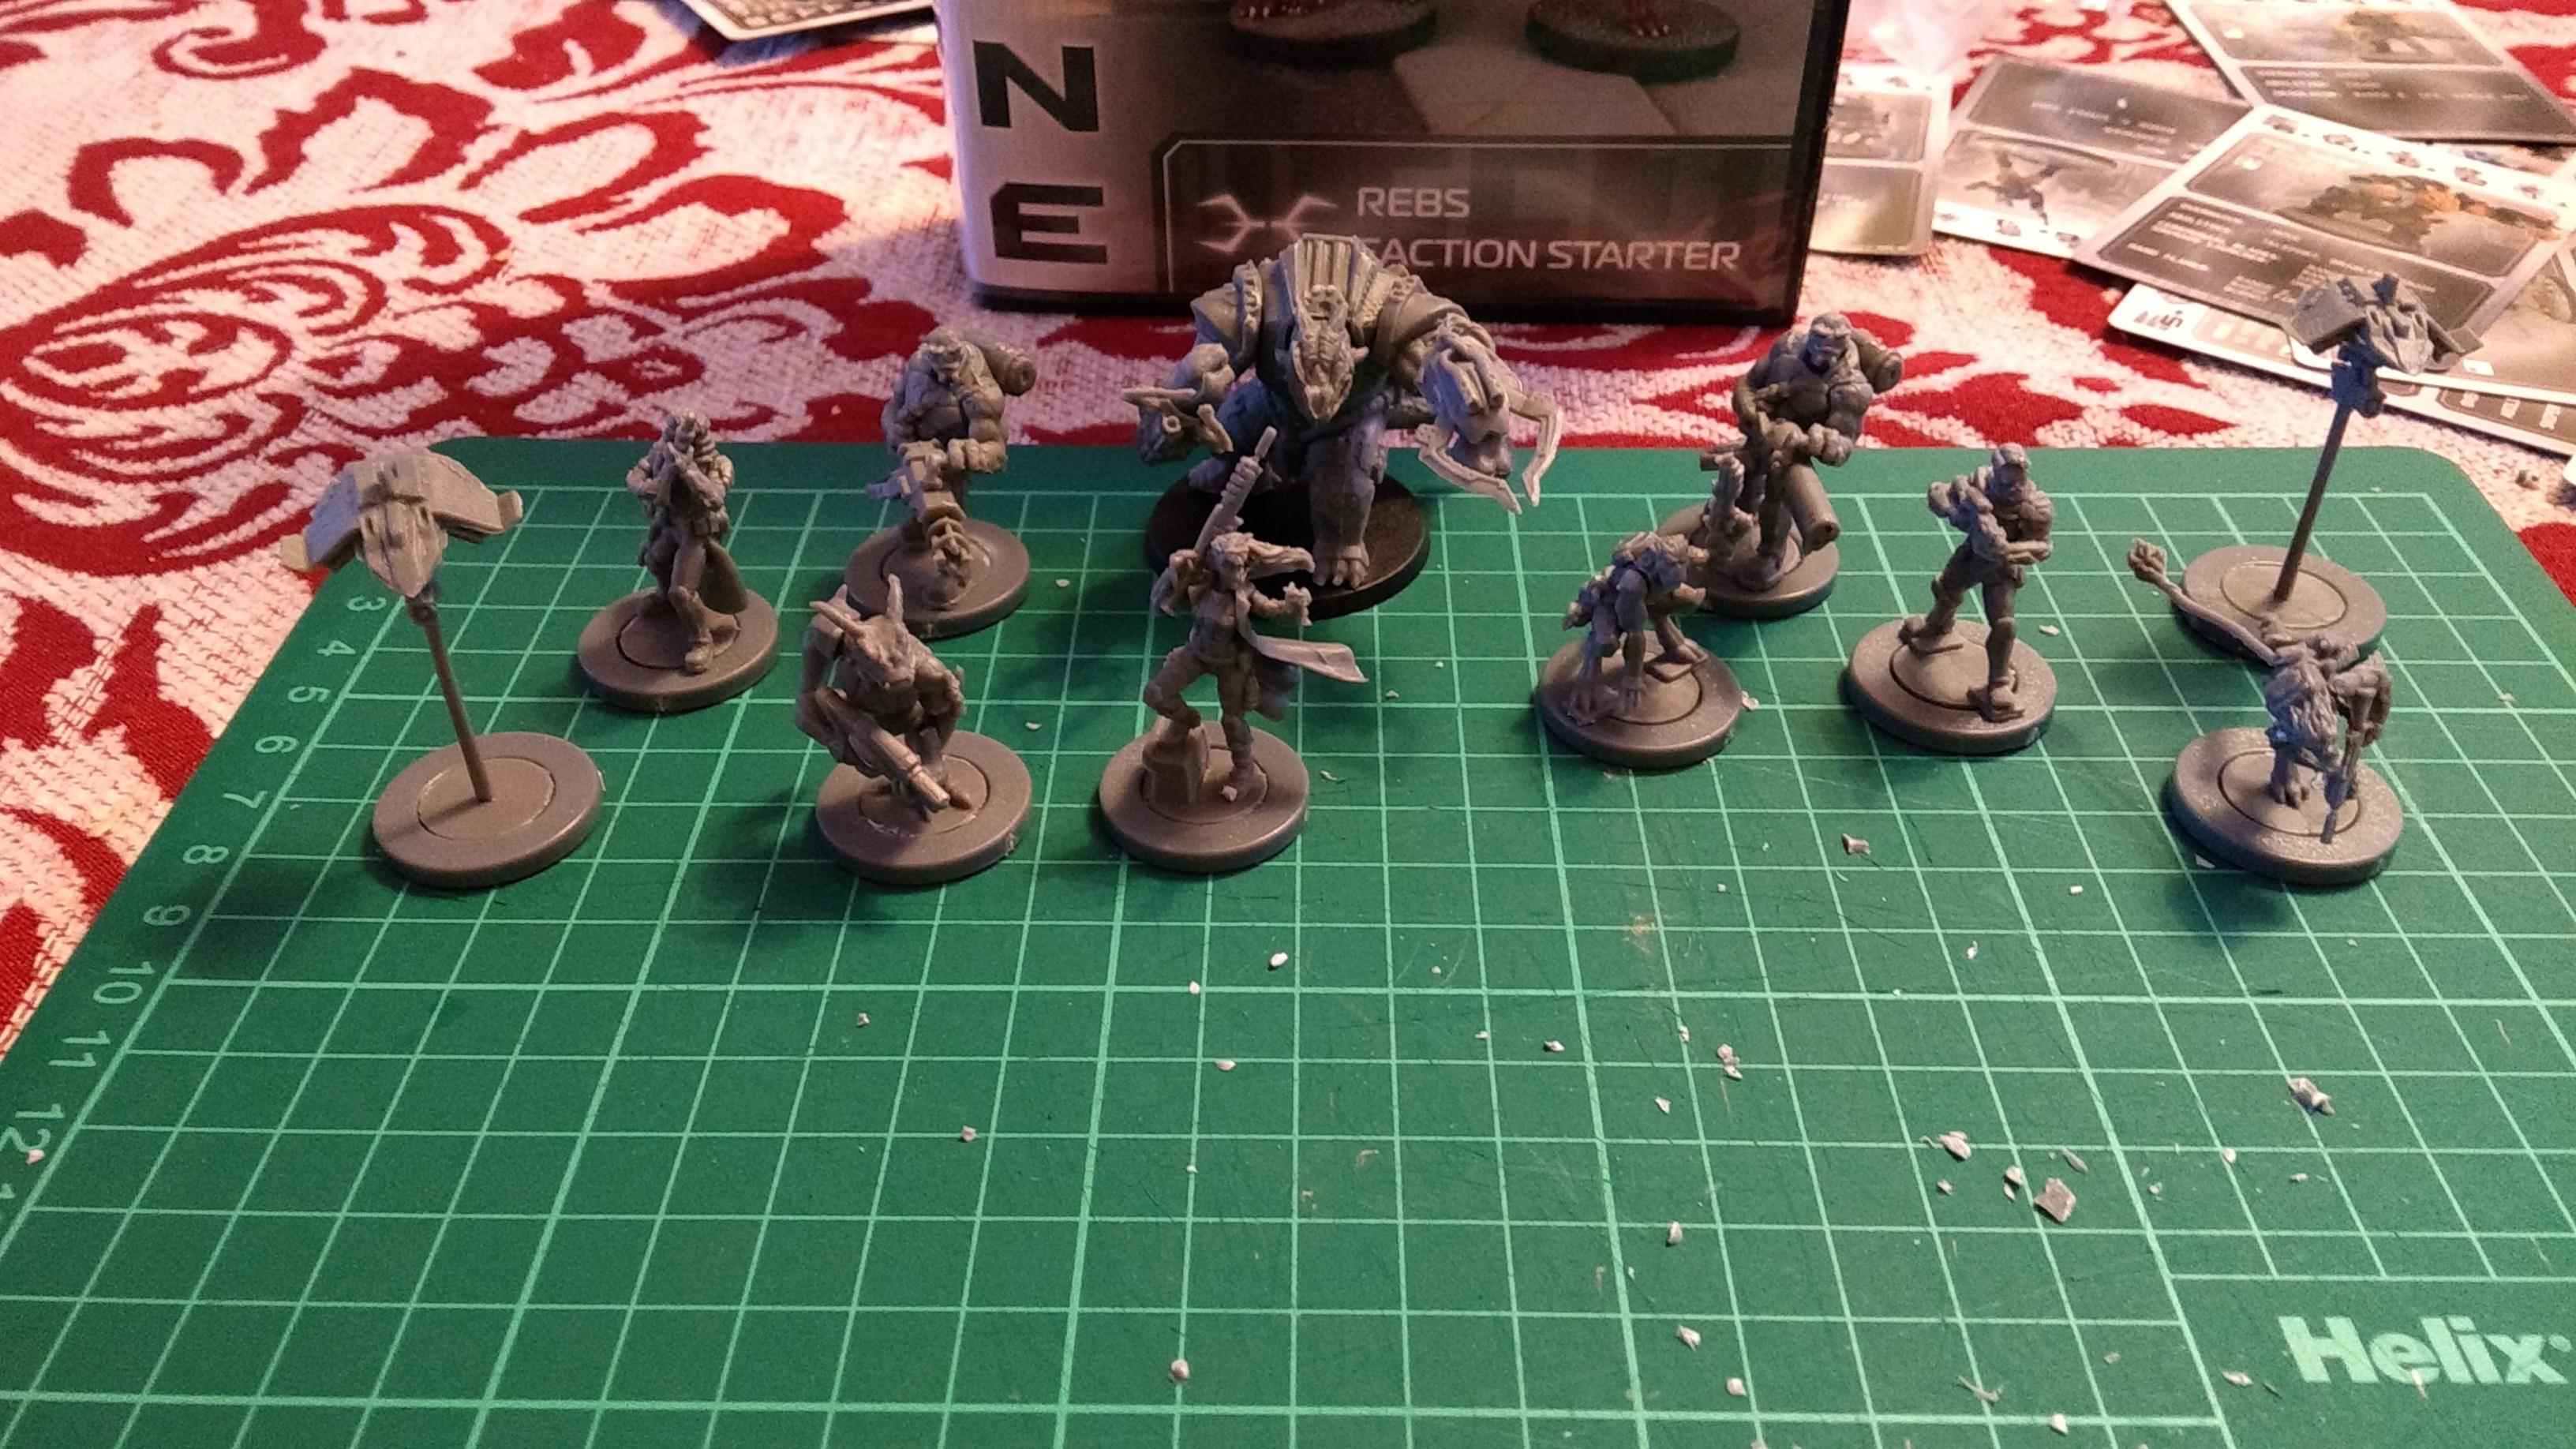 Rebs ready to be painted